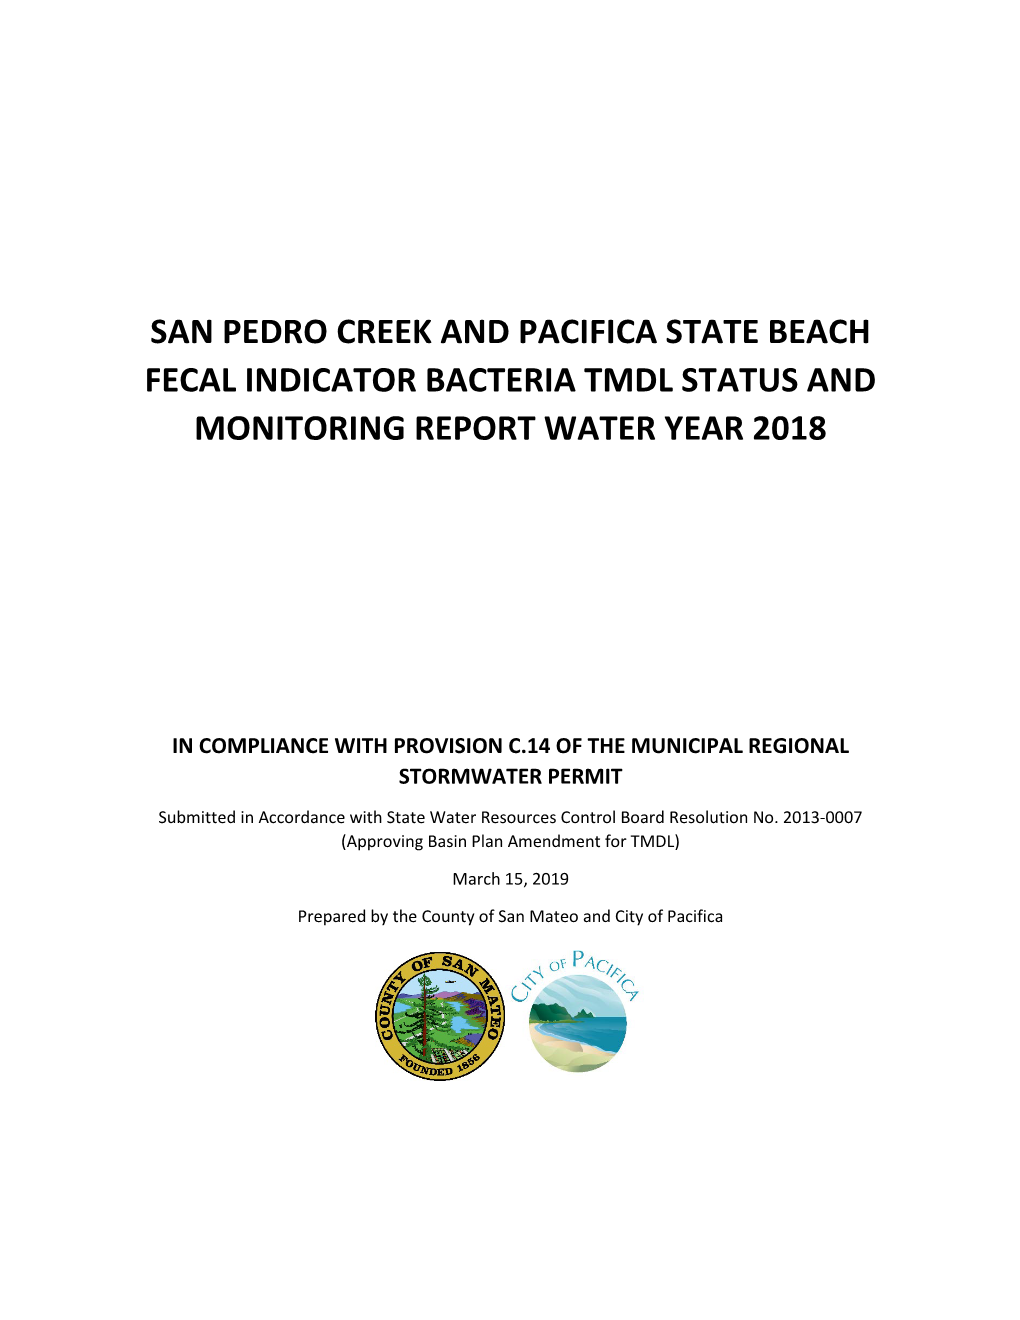 San Pedro Creek and Pacifica State Beach Fecal Indicator Bacteria Tmdl Status and Monitoring Report Water Year 2018